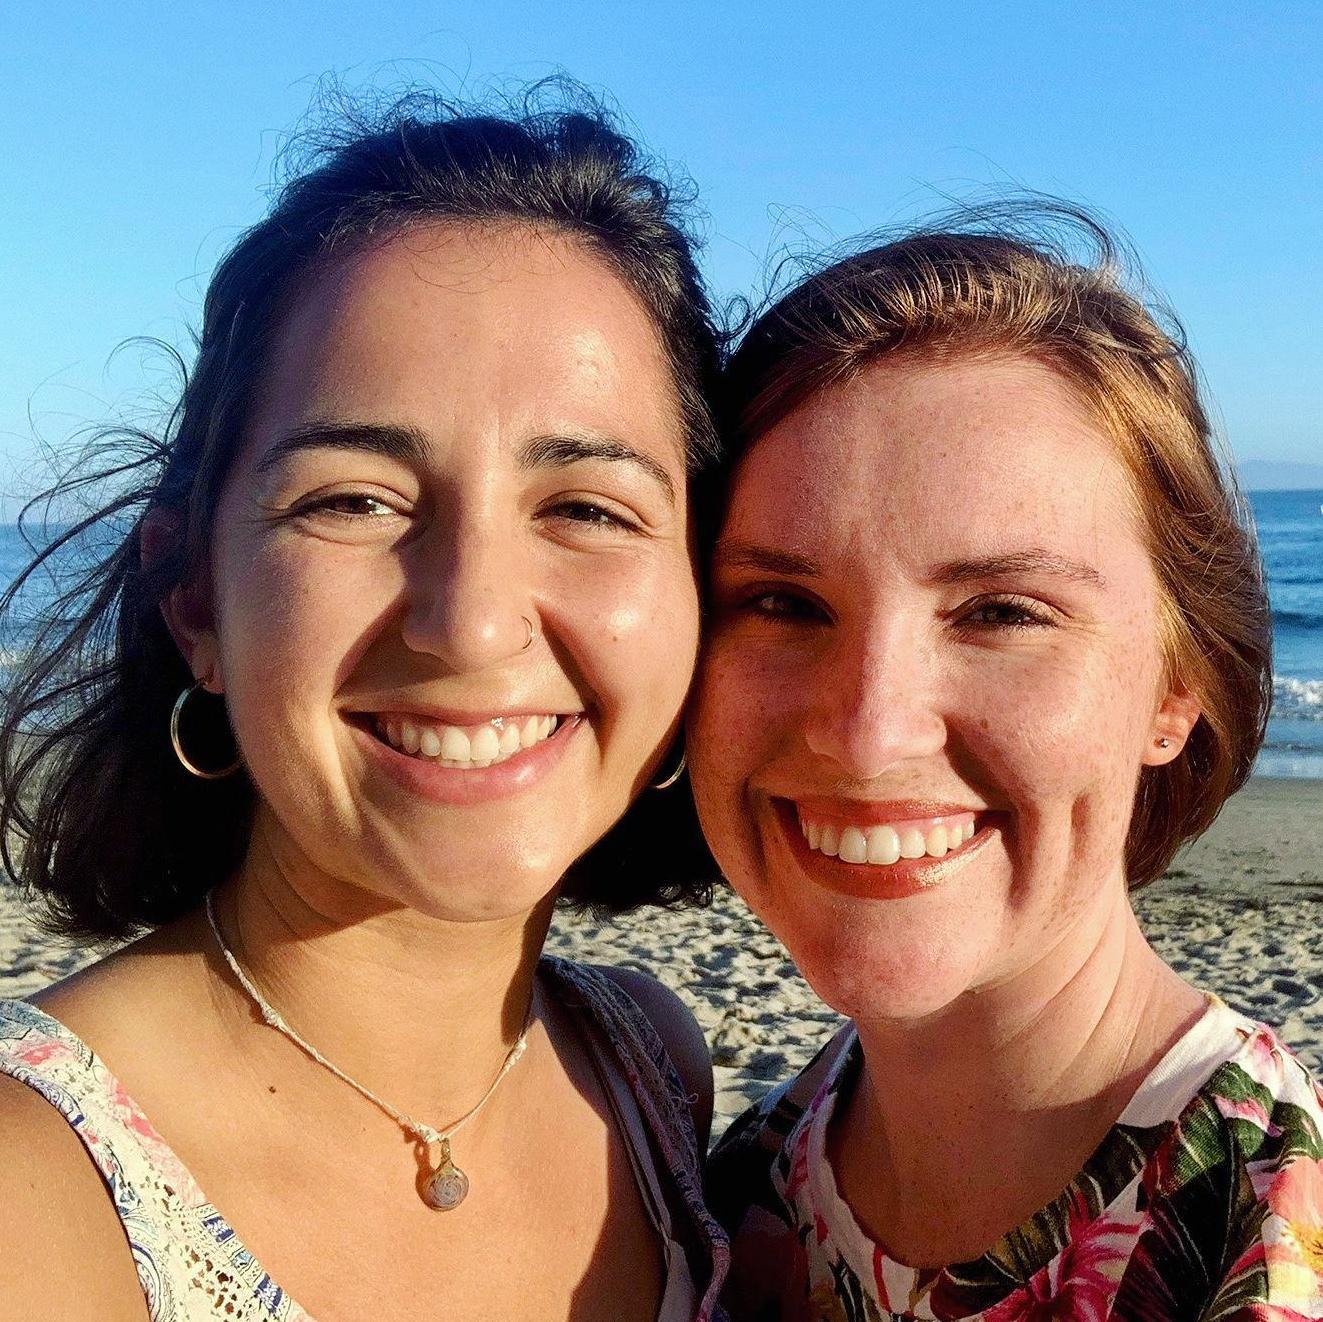 Our first trip together – to Santa Barbara! June 2020